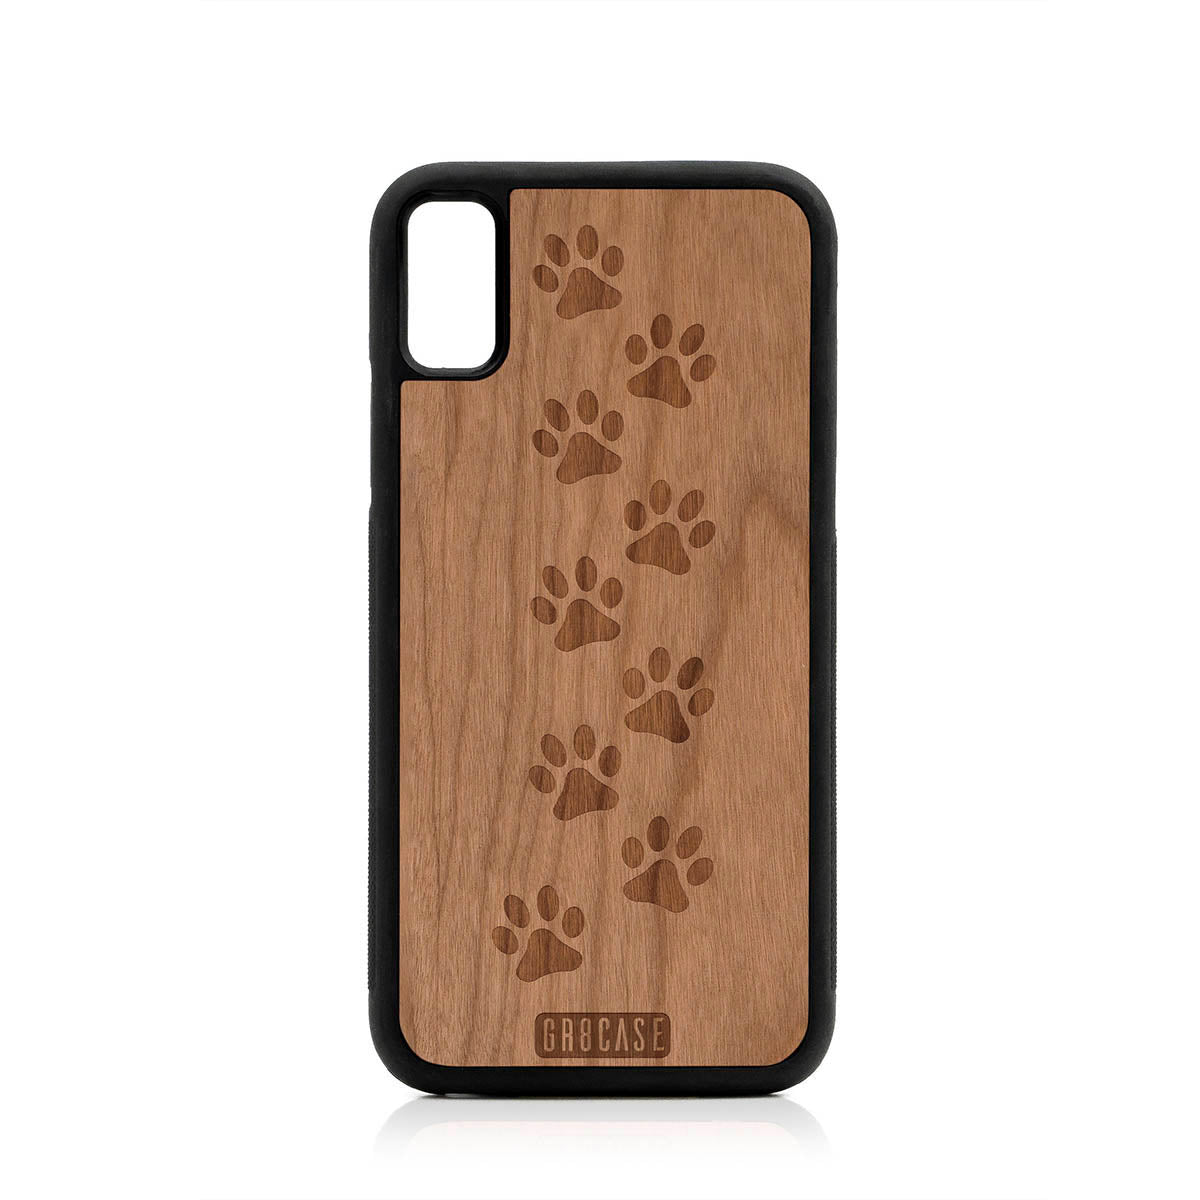 Paw Prints Design Wood Case For iPhone XS Max by GR8CASE